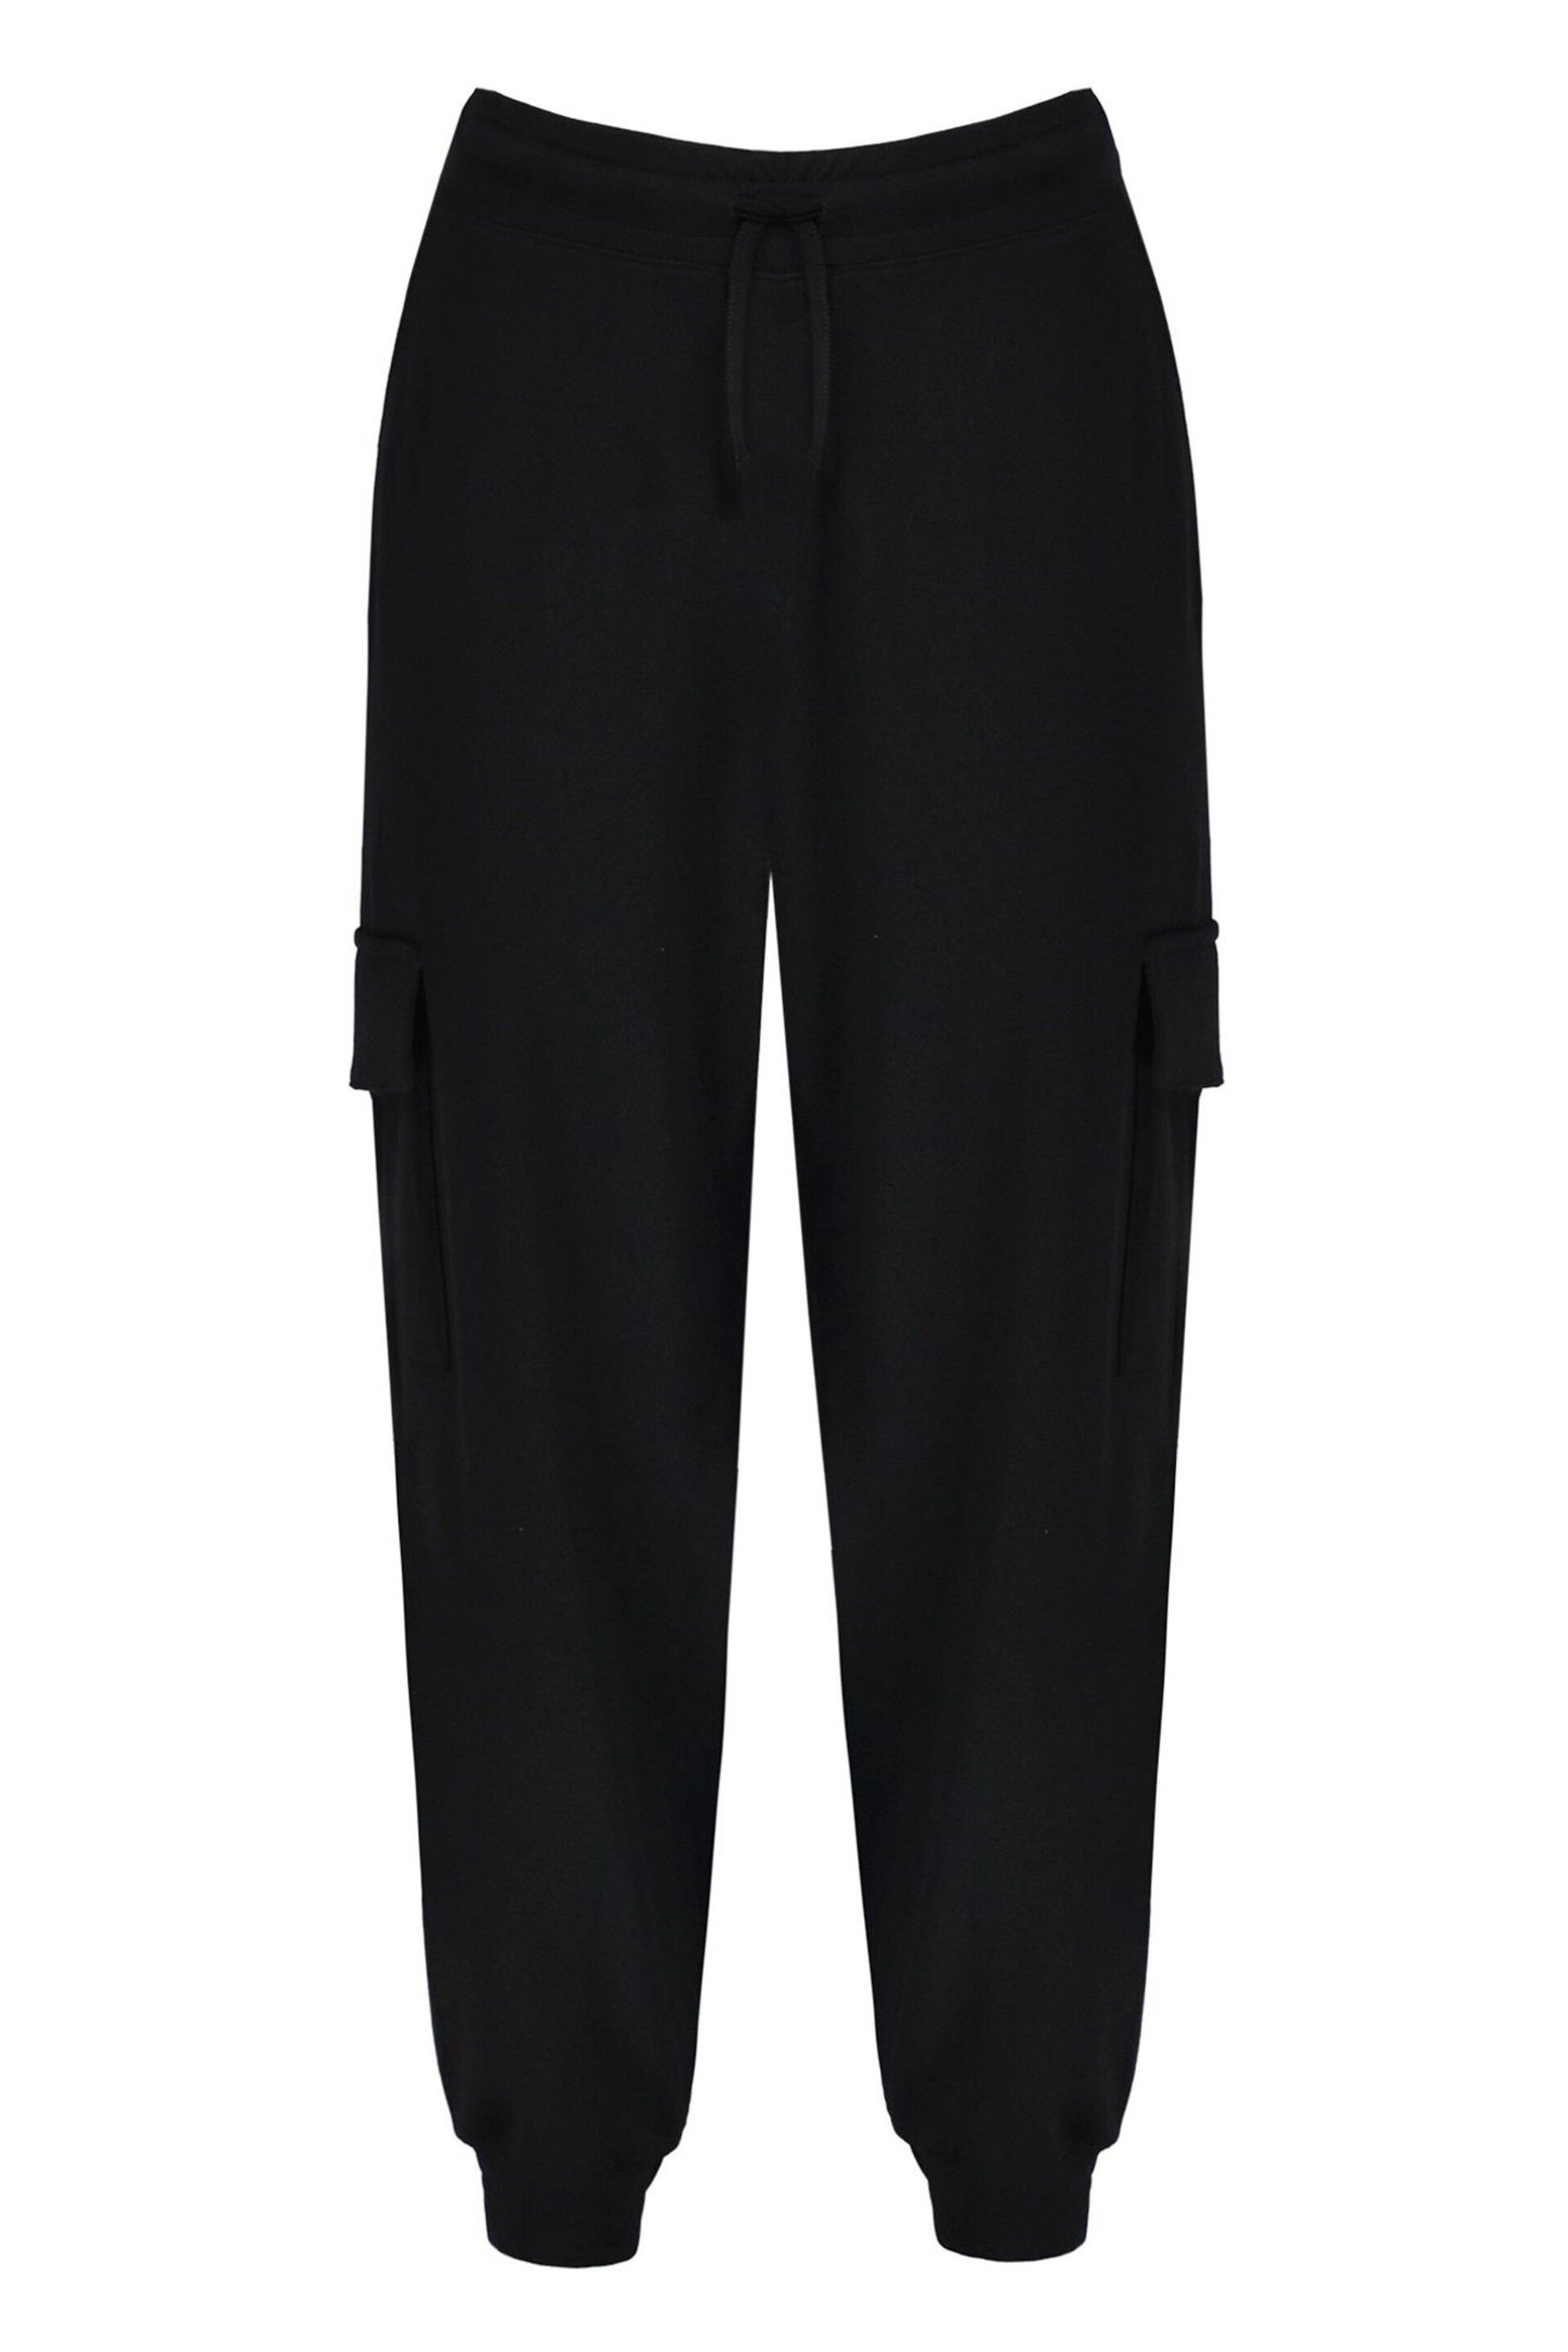 Live Unlimited Curve Jersey Cargo Black Trousers - Image 4 of 4